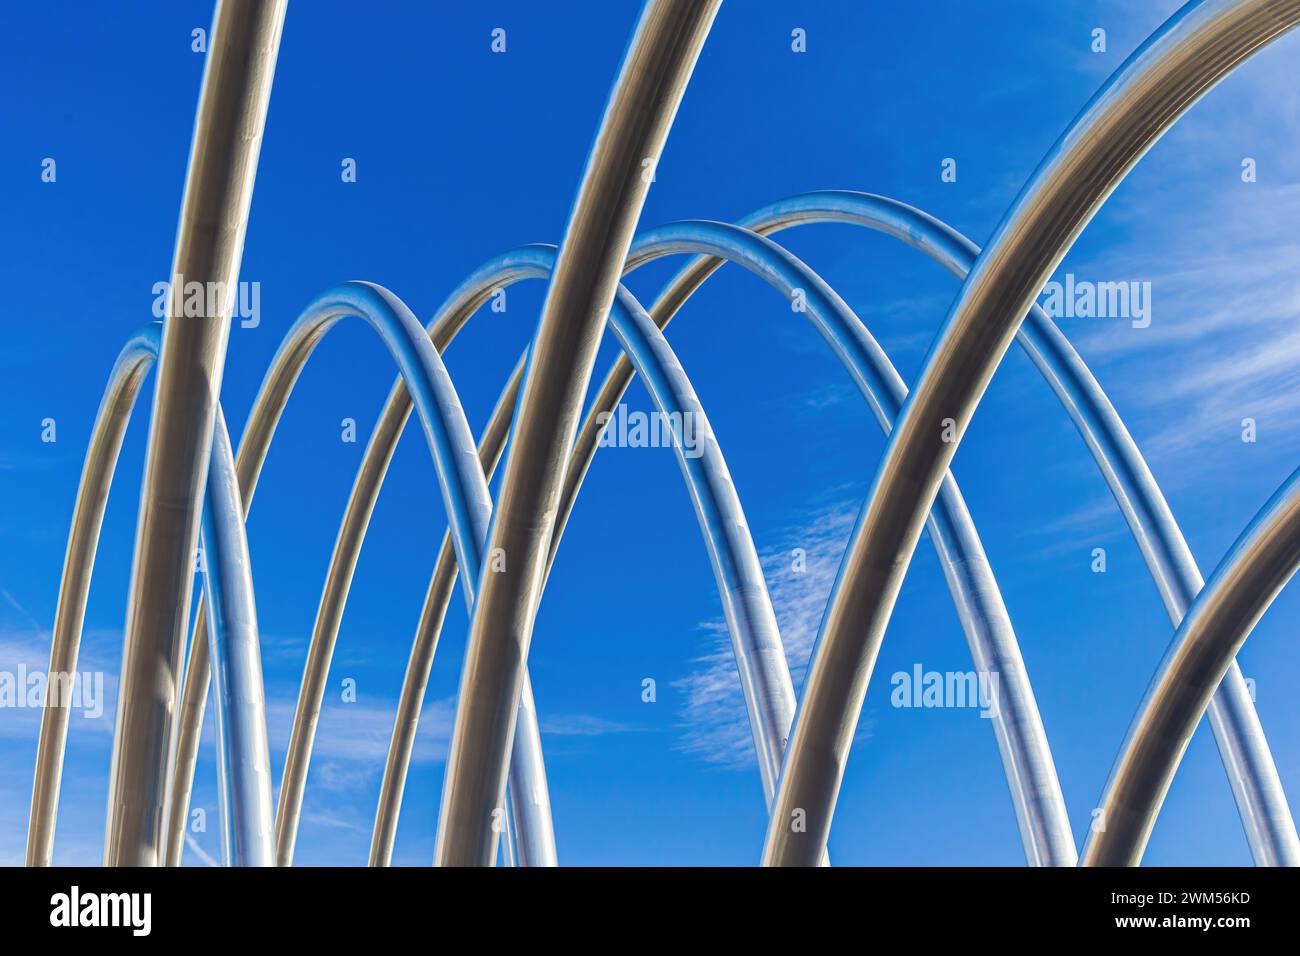 Abstract Metal Pipes and Tubes Sculpture Madrid, Spain Stock Photo